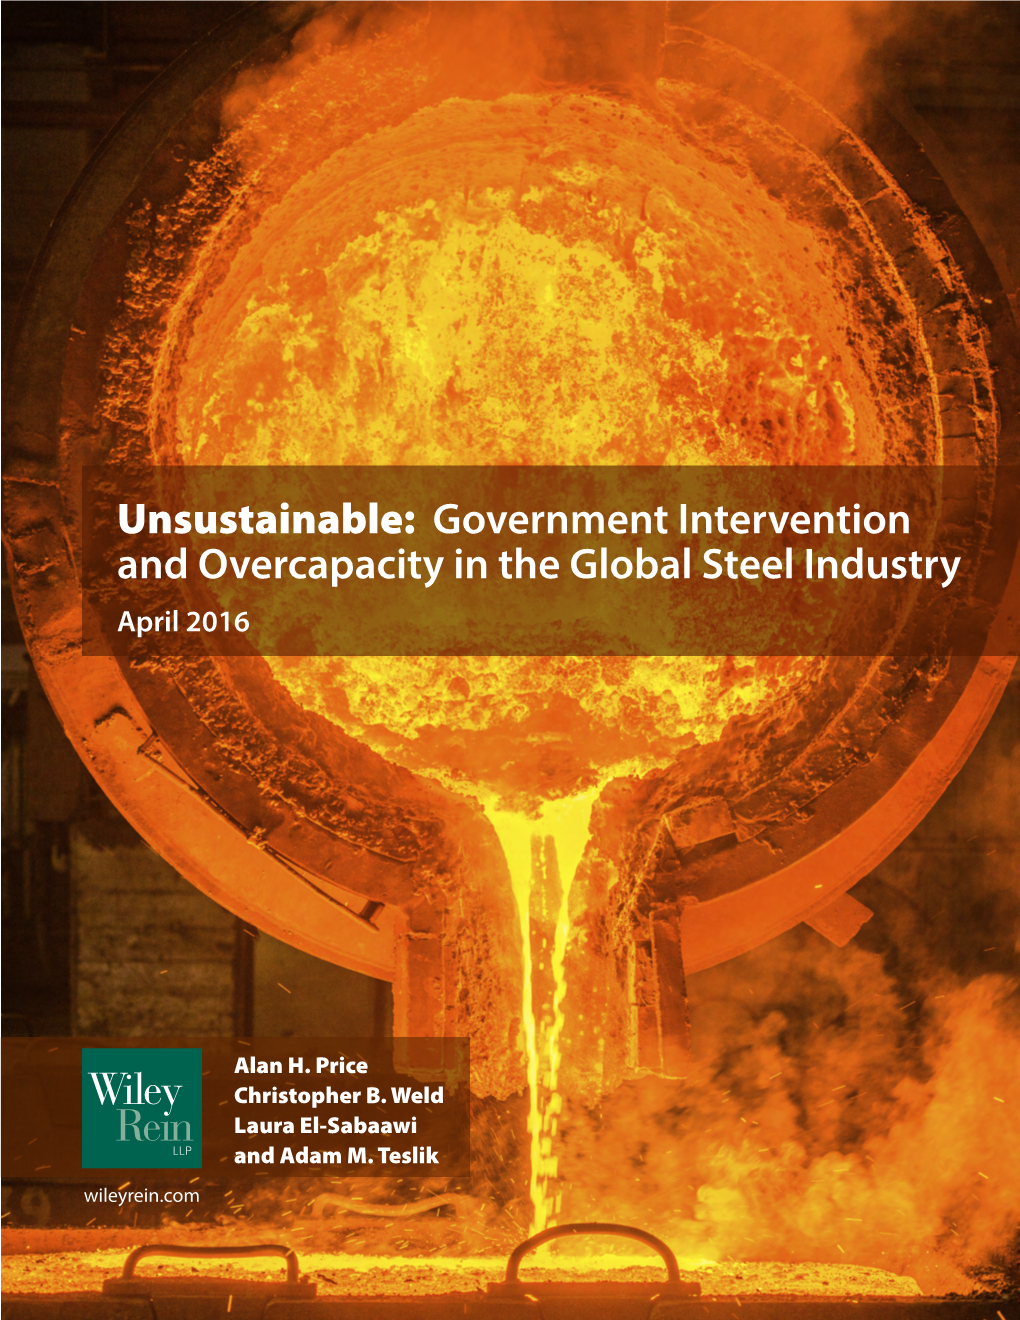 Government Intervention and Overcapacity in the Global Steel Industry April 2016